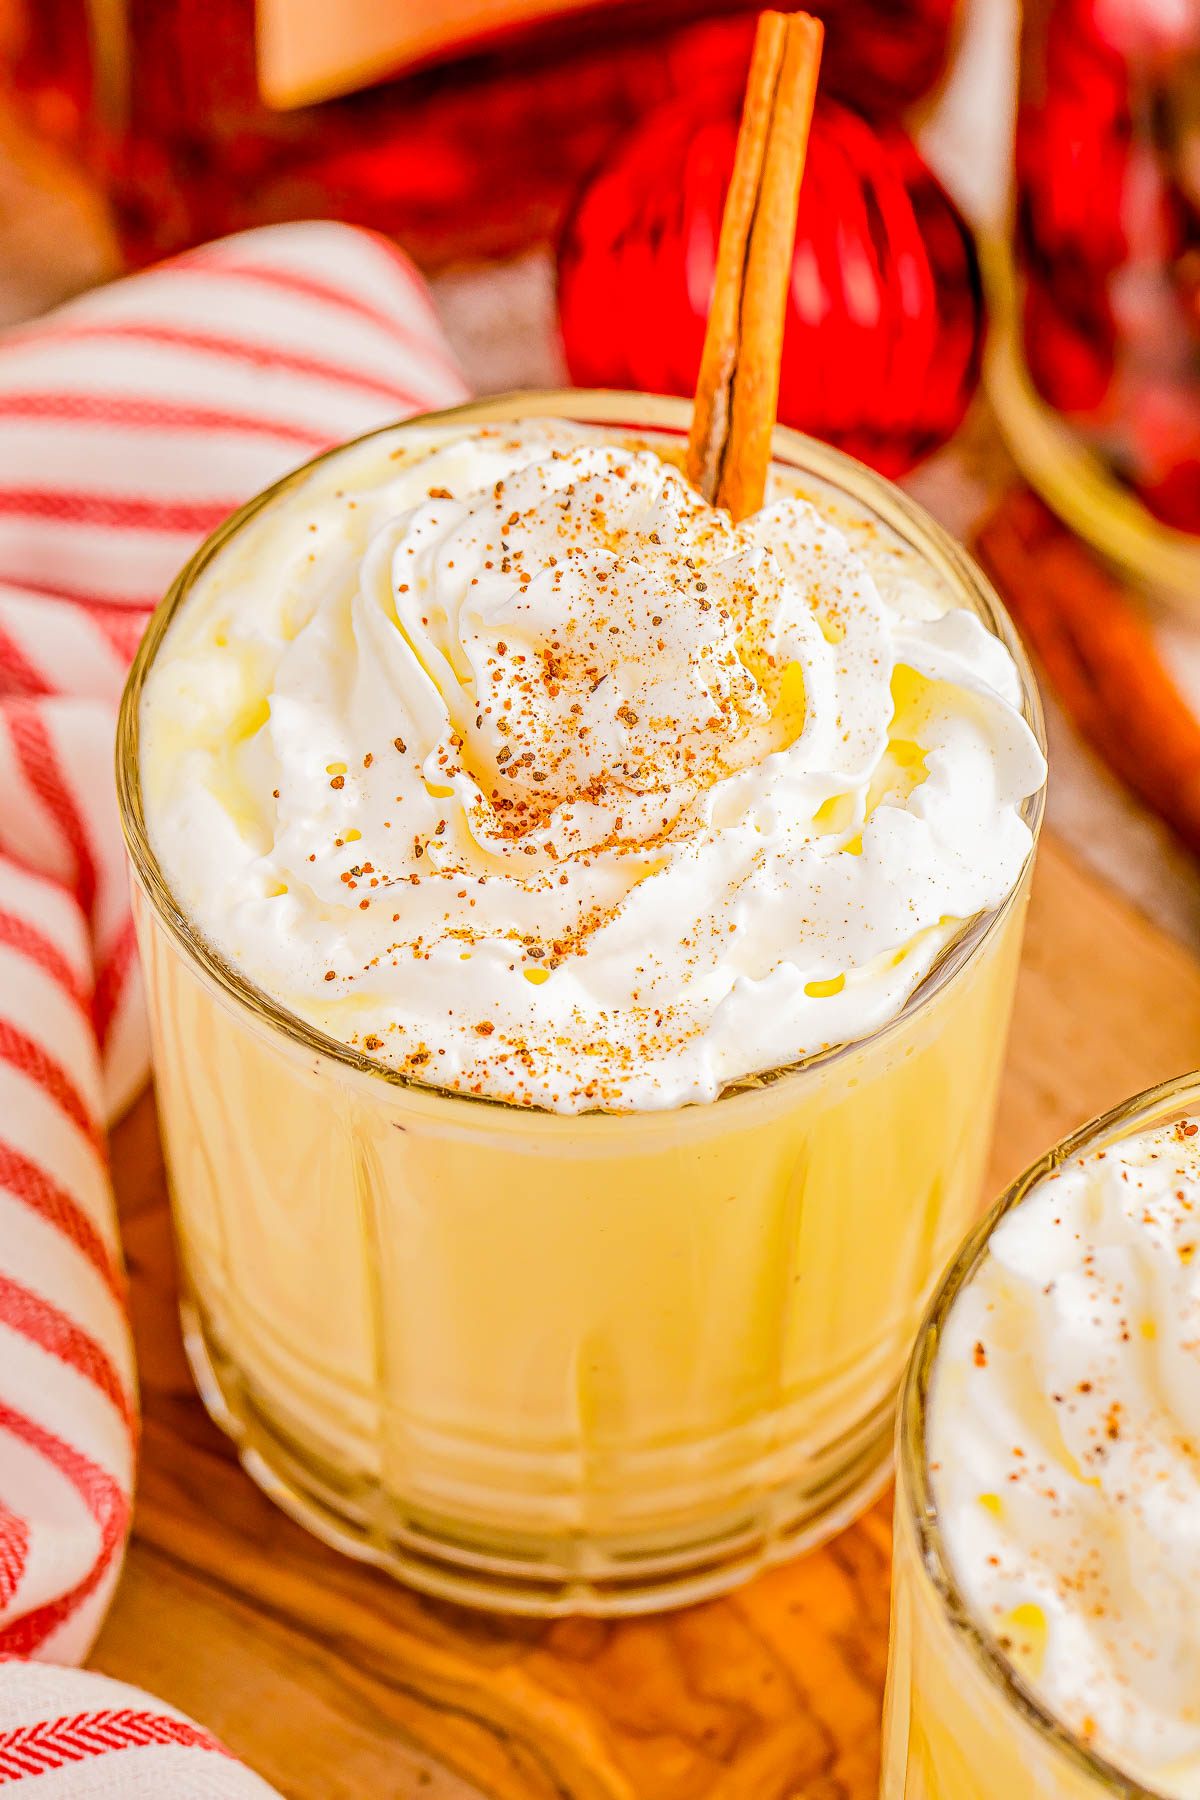 Spiked Eggnog with Amaretto and Spiced Rum - Wondering what to do with your eggnog? Making this EASY three-ingredient spiked eggnog cocktail recipe is the PERFECT idea! Smooth, rich and creamy with warm hints of cinnamon, cloves, and vanilla from the spiced rum and almond from the amaretto. Spiked eggnog will be a hit at your Christmas parties and New Years Eve party! Instructions on how to make a large batch or pitcher are provided.